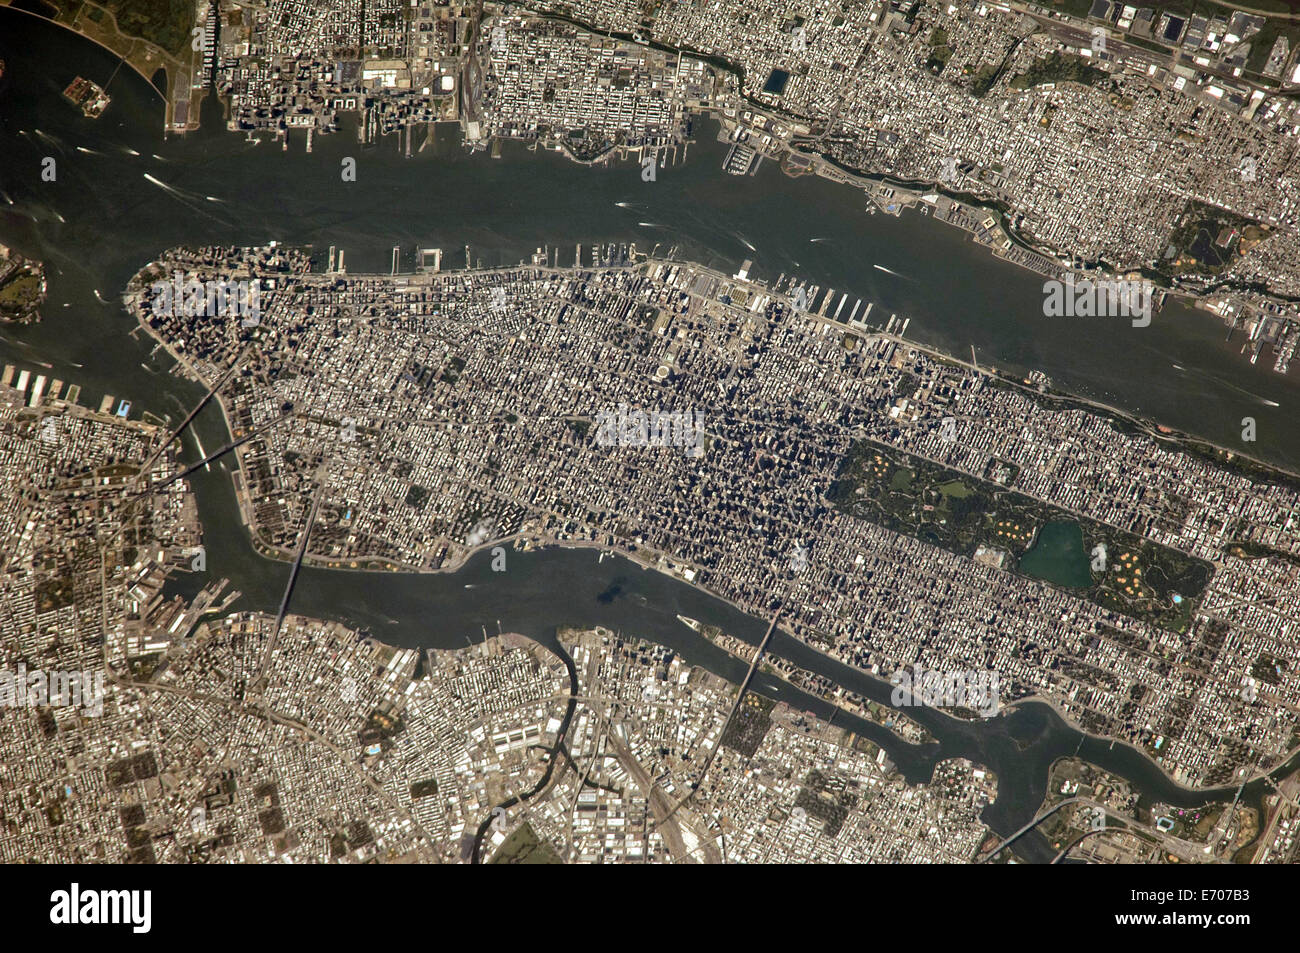 View from the International Space Station of New York City revealing the narrow shape of Manhattan located between the Hudson River and the East River August 25, 2014. Manhattan Island and its Central Park are tell-tale points for recognition purposes for the six-person crew of the orbital outpost, flying approximately 225 nautical miles above the city. The 800mm focal length used by the crew member provides great detail in the scene. Stock Photo